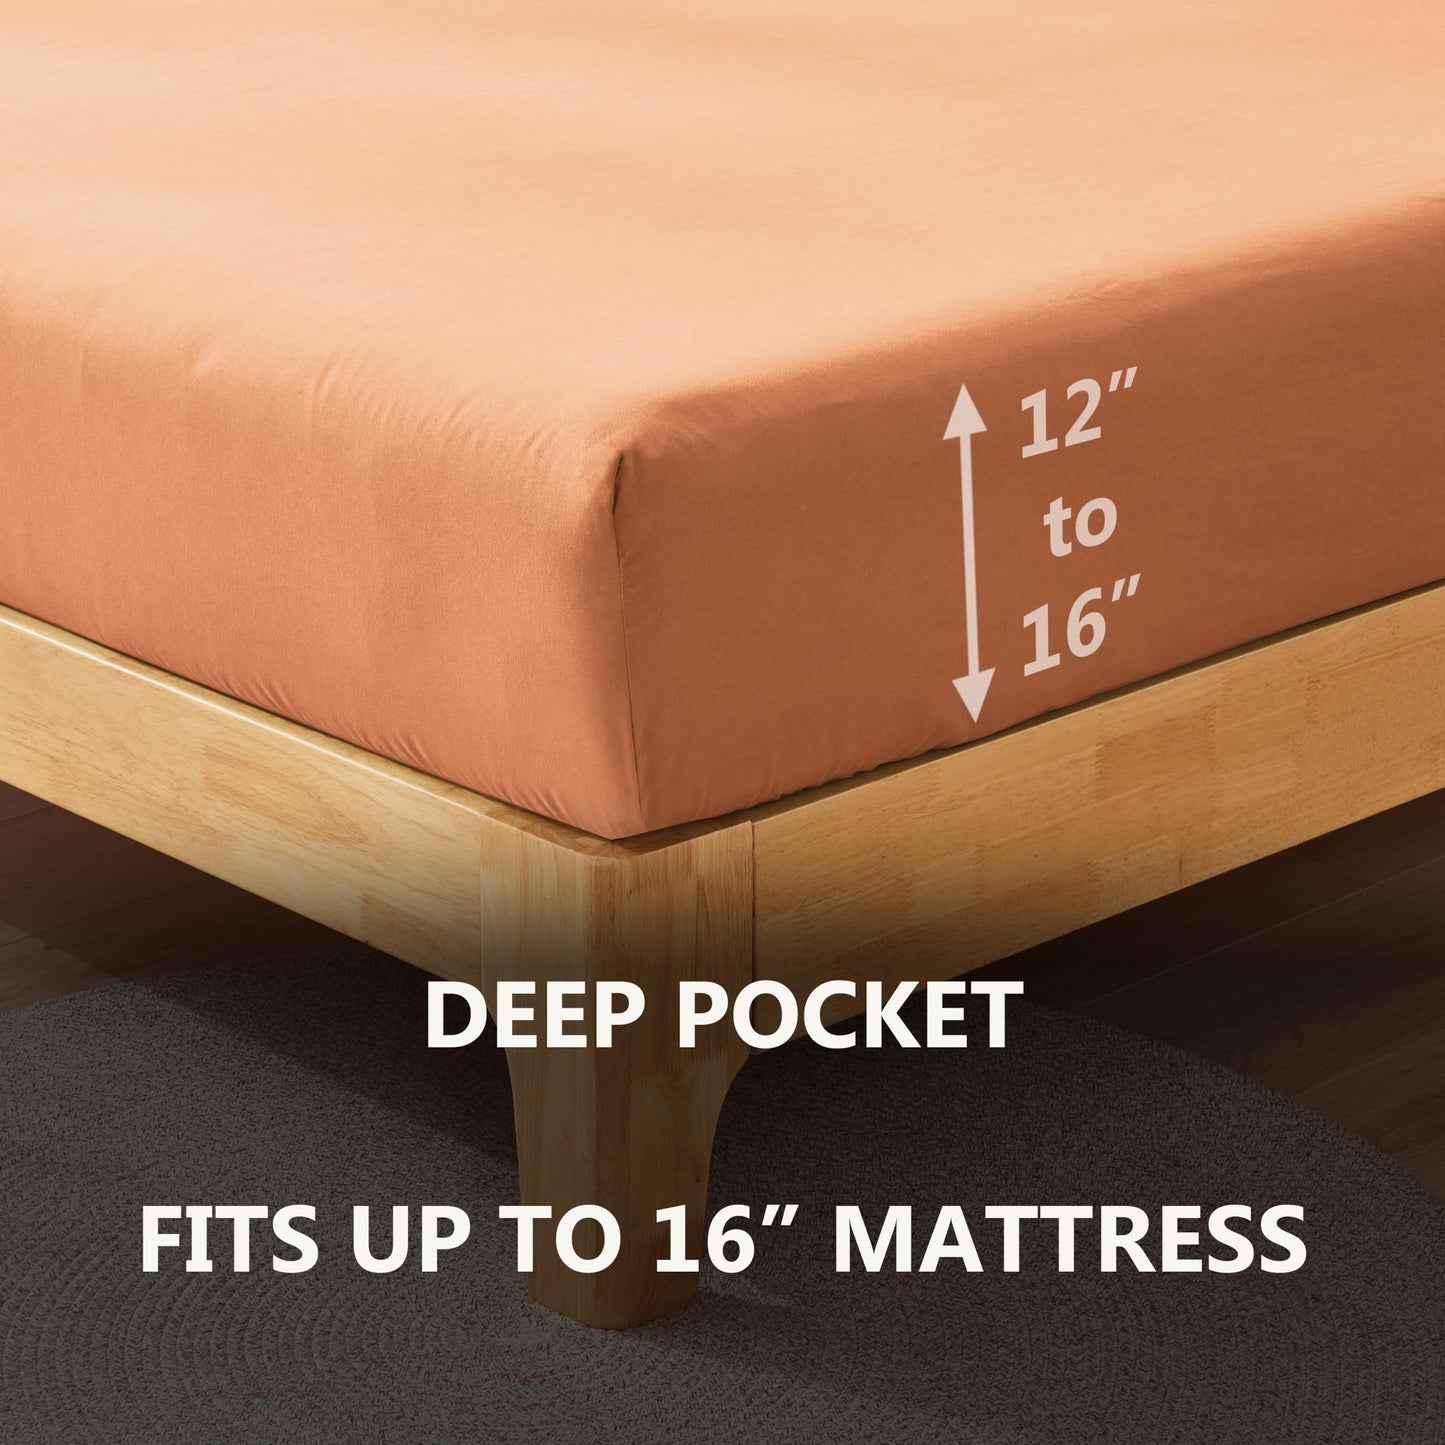 Alazuria Pastel Terracotta King Fitted Sheet Only 1 Piece Mattress Sheet 12 to 16 Inches Deep Pocket, Hotel Luxury Premium Quality, Solid Color, Double Brushed with 360-Elastic 80 X 78 Inches